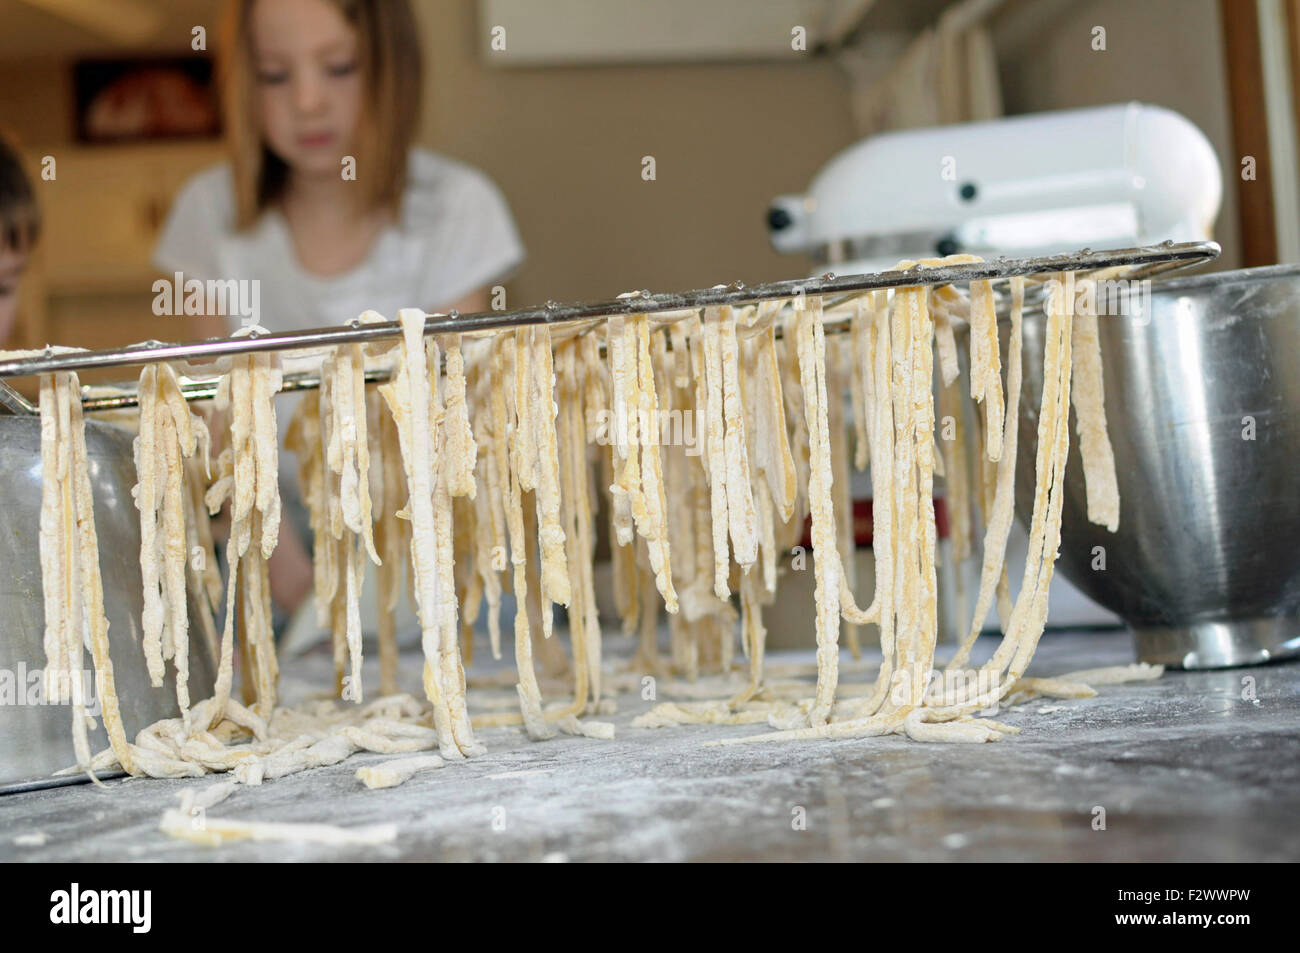 making and drying noodles Stock Photo